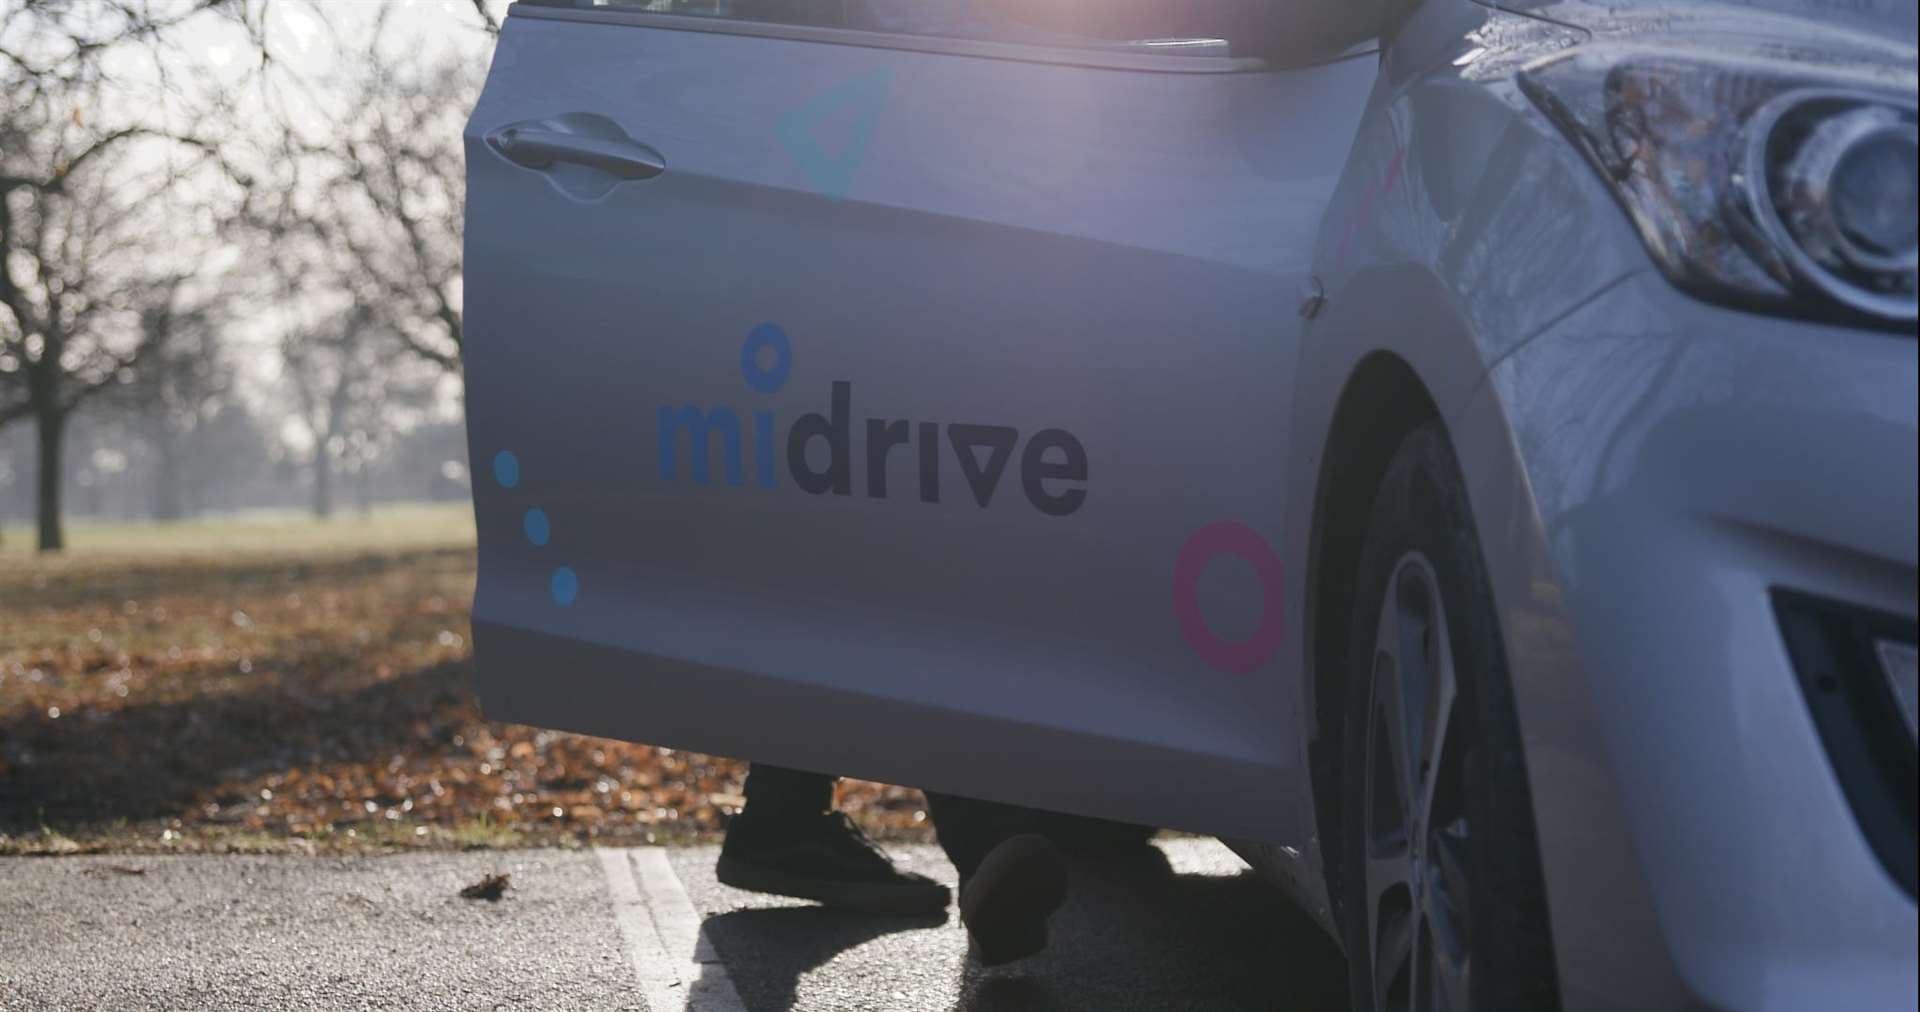 Midrive was founded at the Holiday Extras headquarters in Newingreen, near Hythe